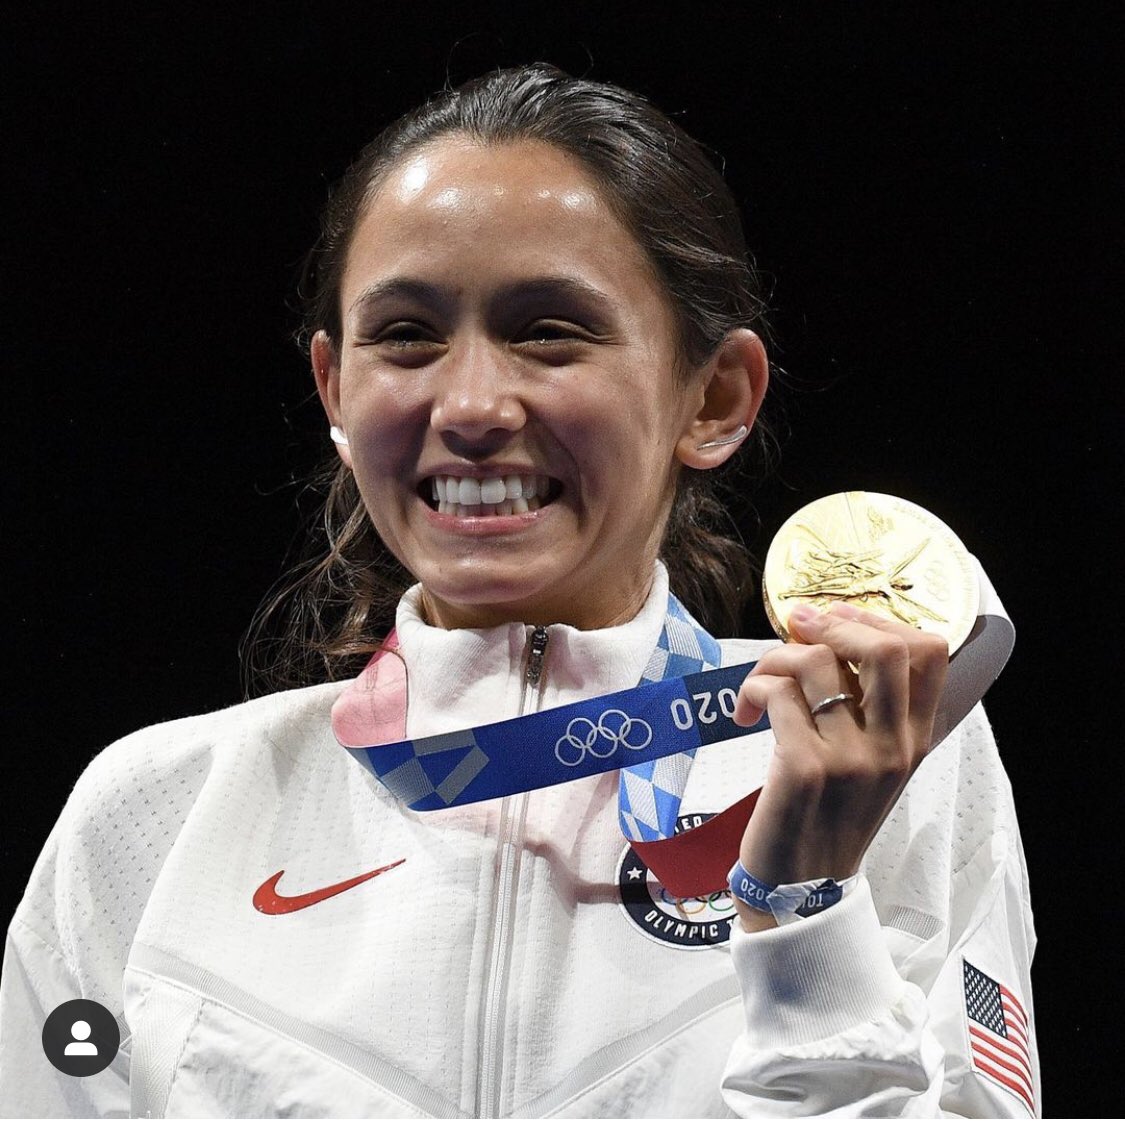 Congratulations to Lee Kiefer, first US woman to win in fencing- Independent Foil. A medical student at University of Kentucky.  We are all elated and proud of you winning gold 
#Olympics2021 #Tokyo2020 #kentucky #leekiefer #fencing